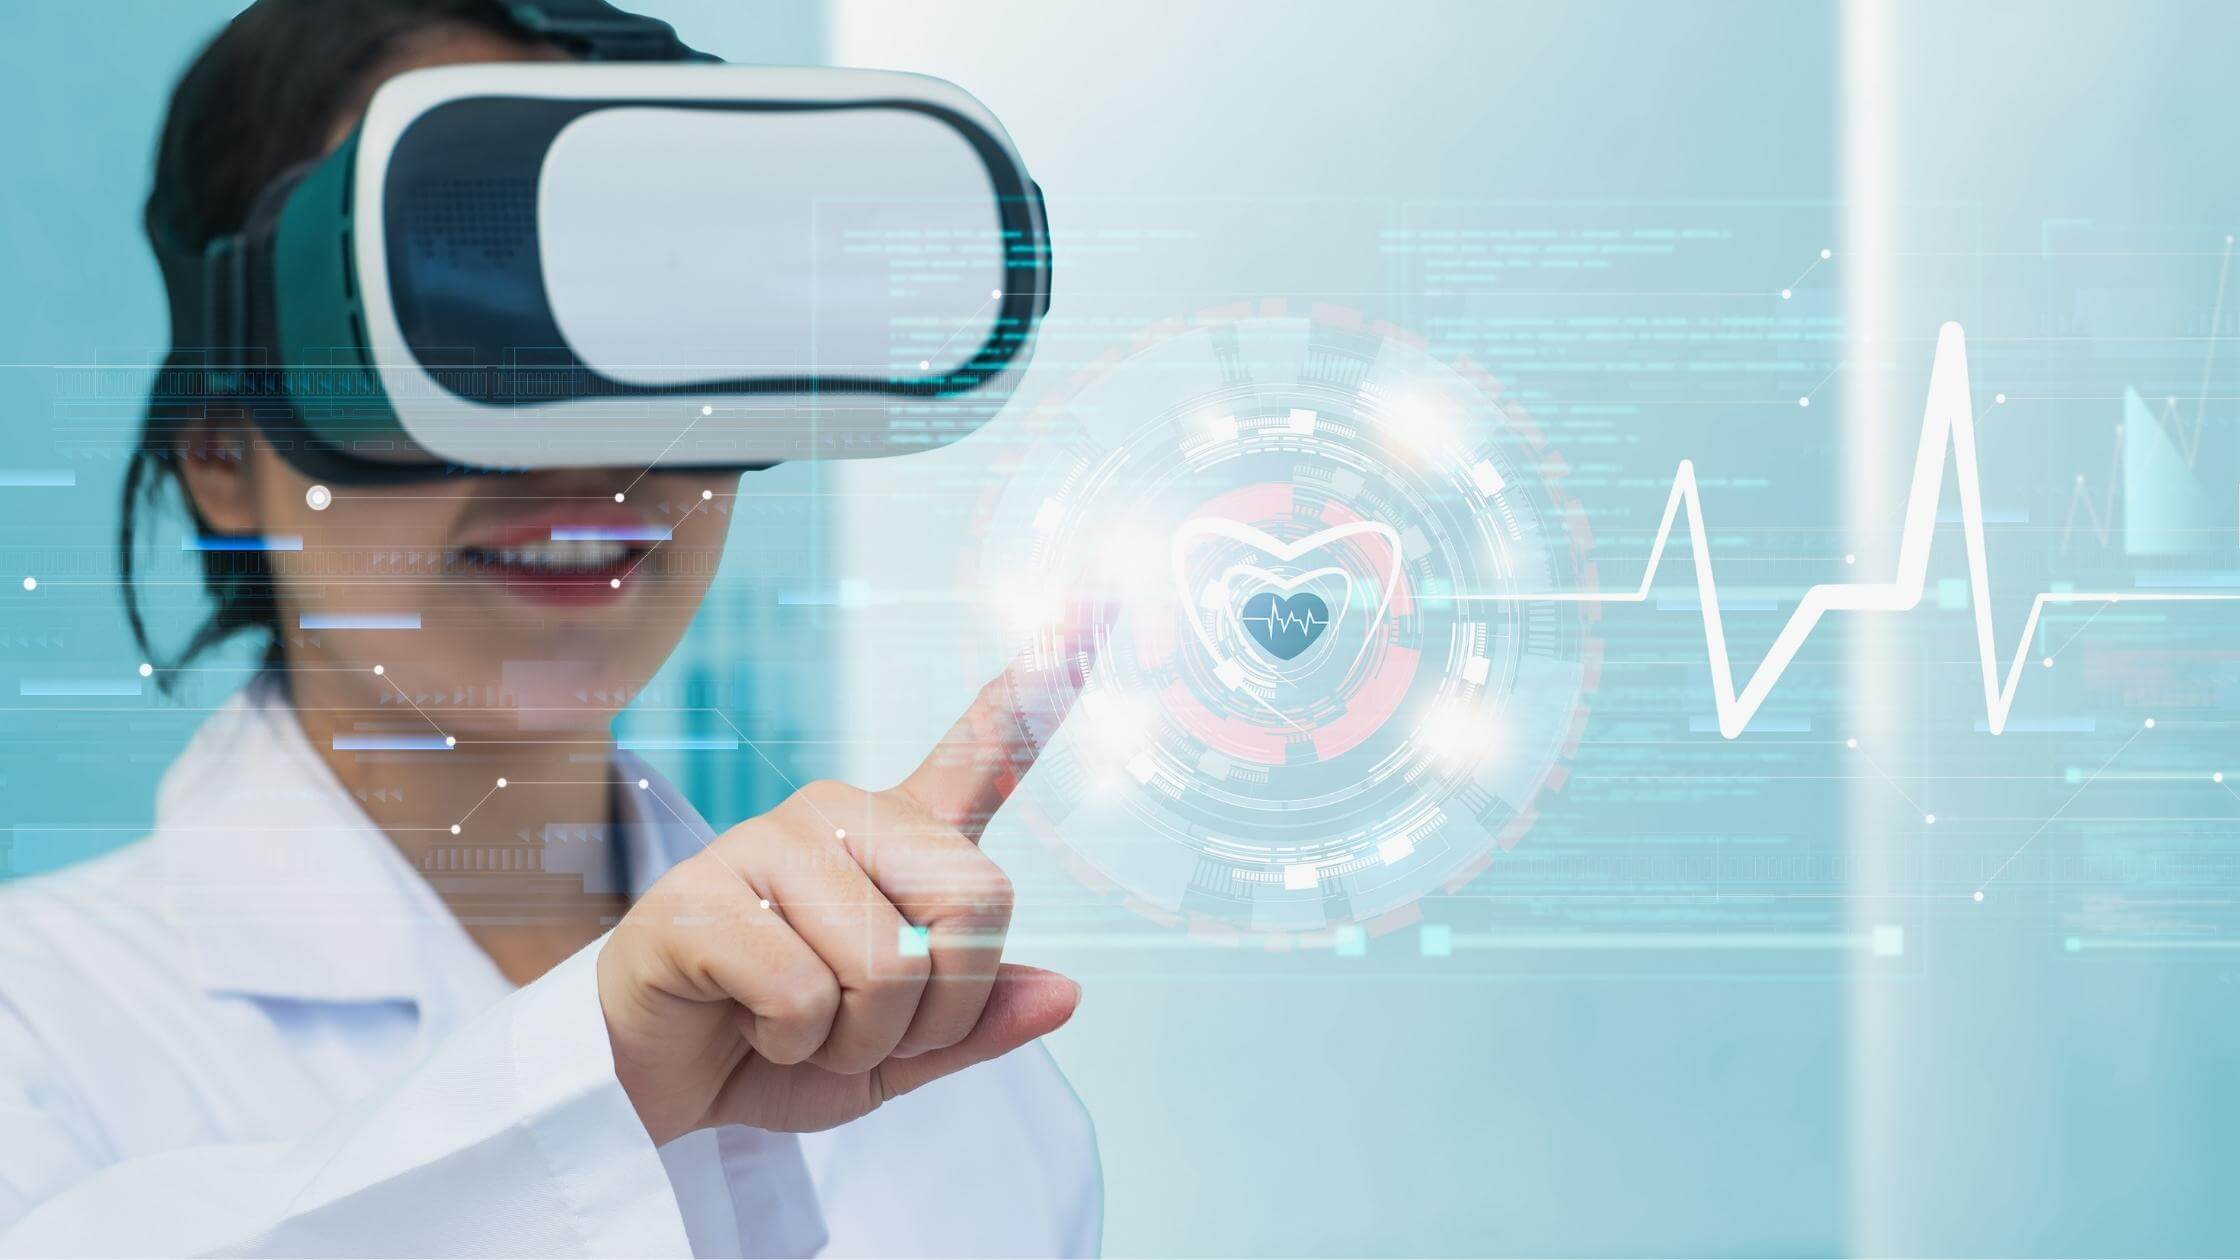 Augmented & Virtual Reality in Healthcare: What You Need to Know